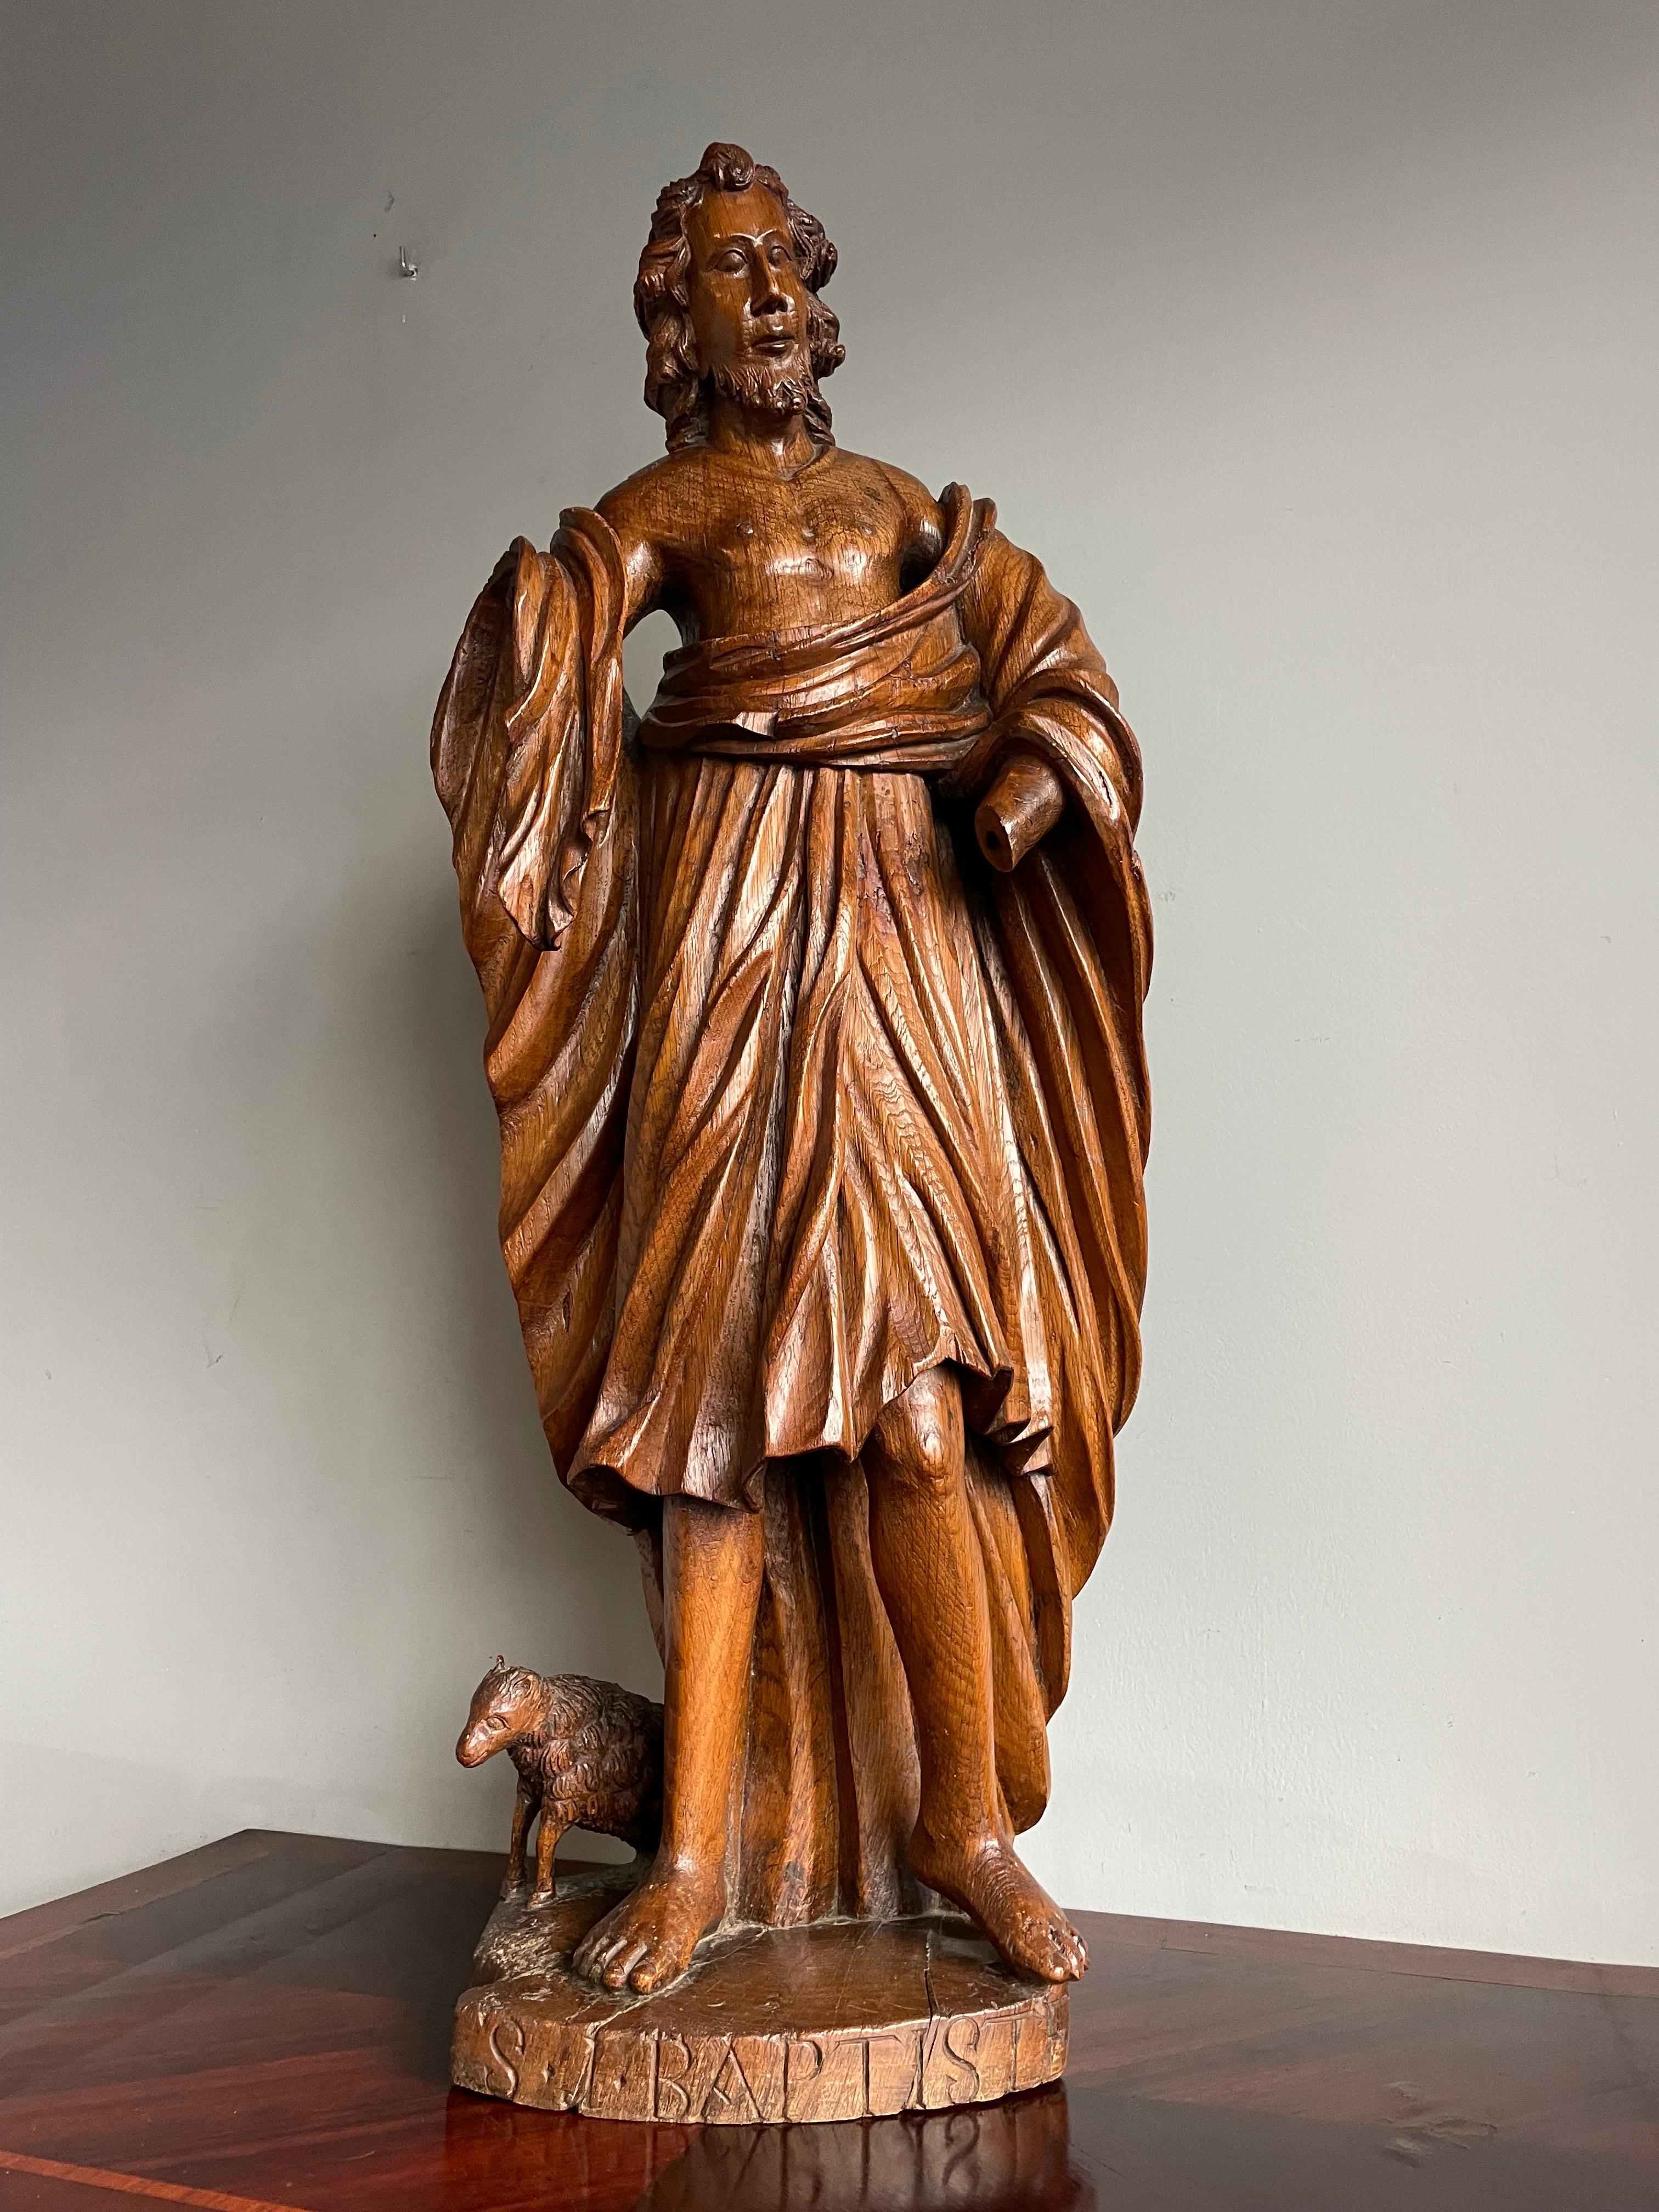 Unique hand carved church statue of Jewish prophet, John the Baptist, circa 1850.

When you think of the life of Saint John the Baptist (or Baptiste as it is spelled here) then you can only come to the conclusion that in fact he was one of the most